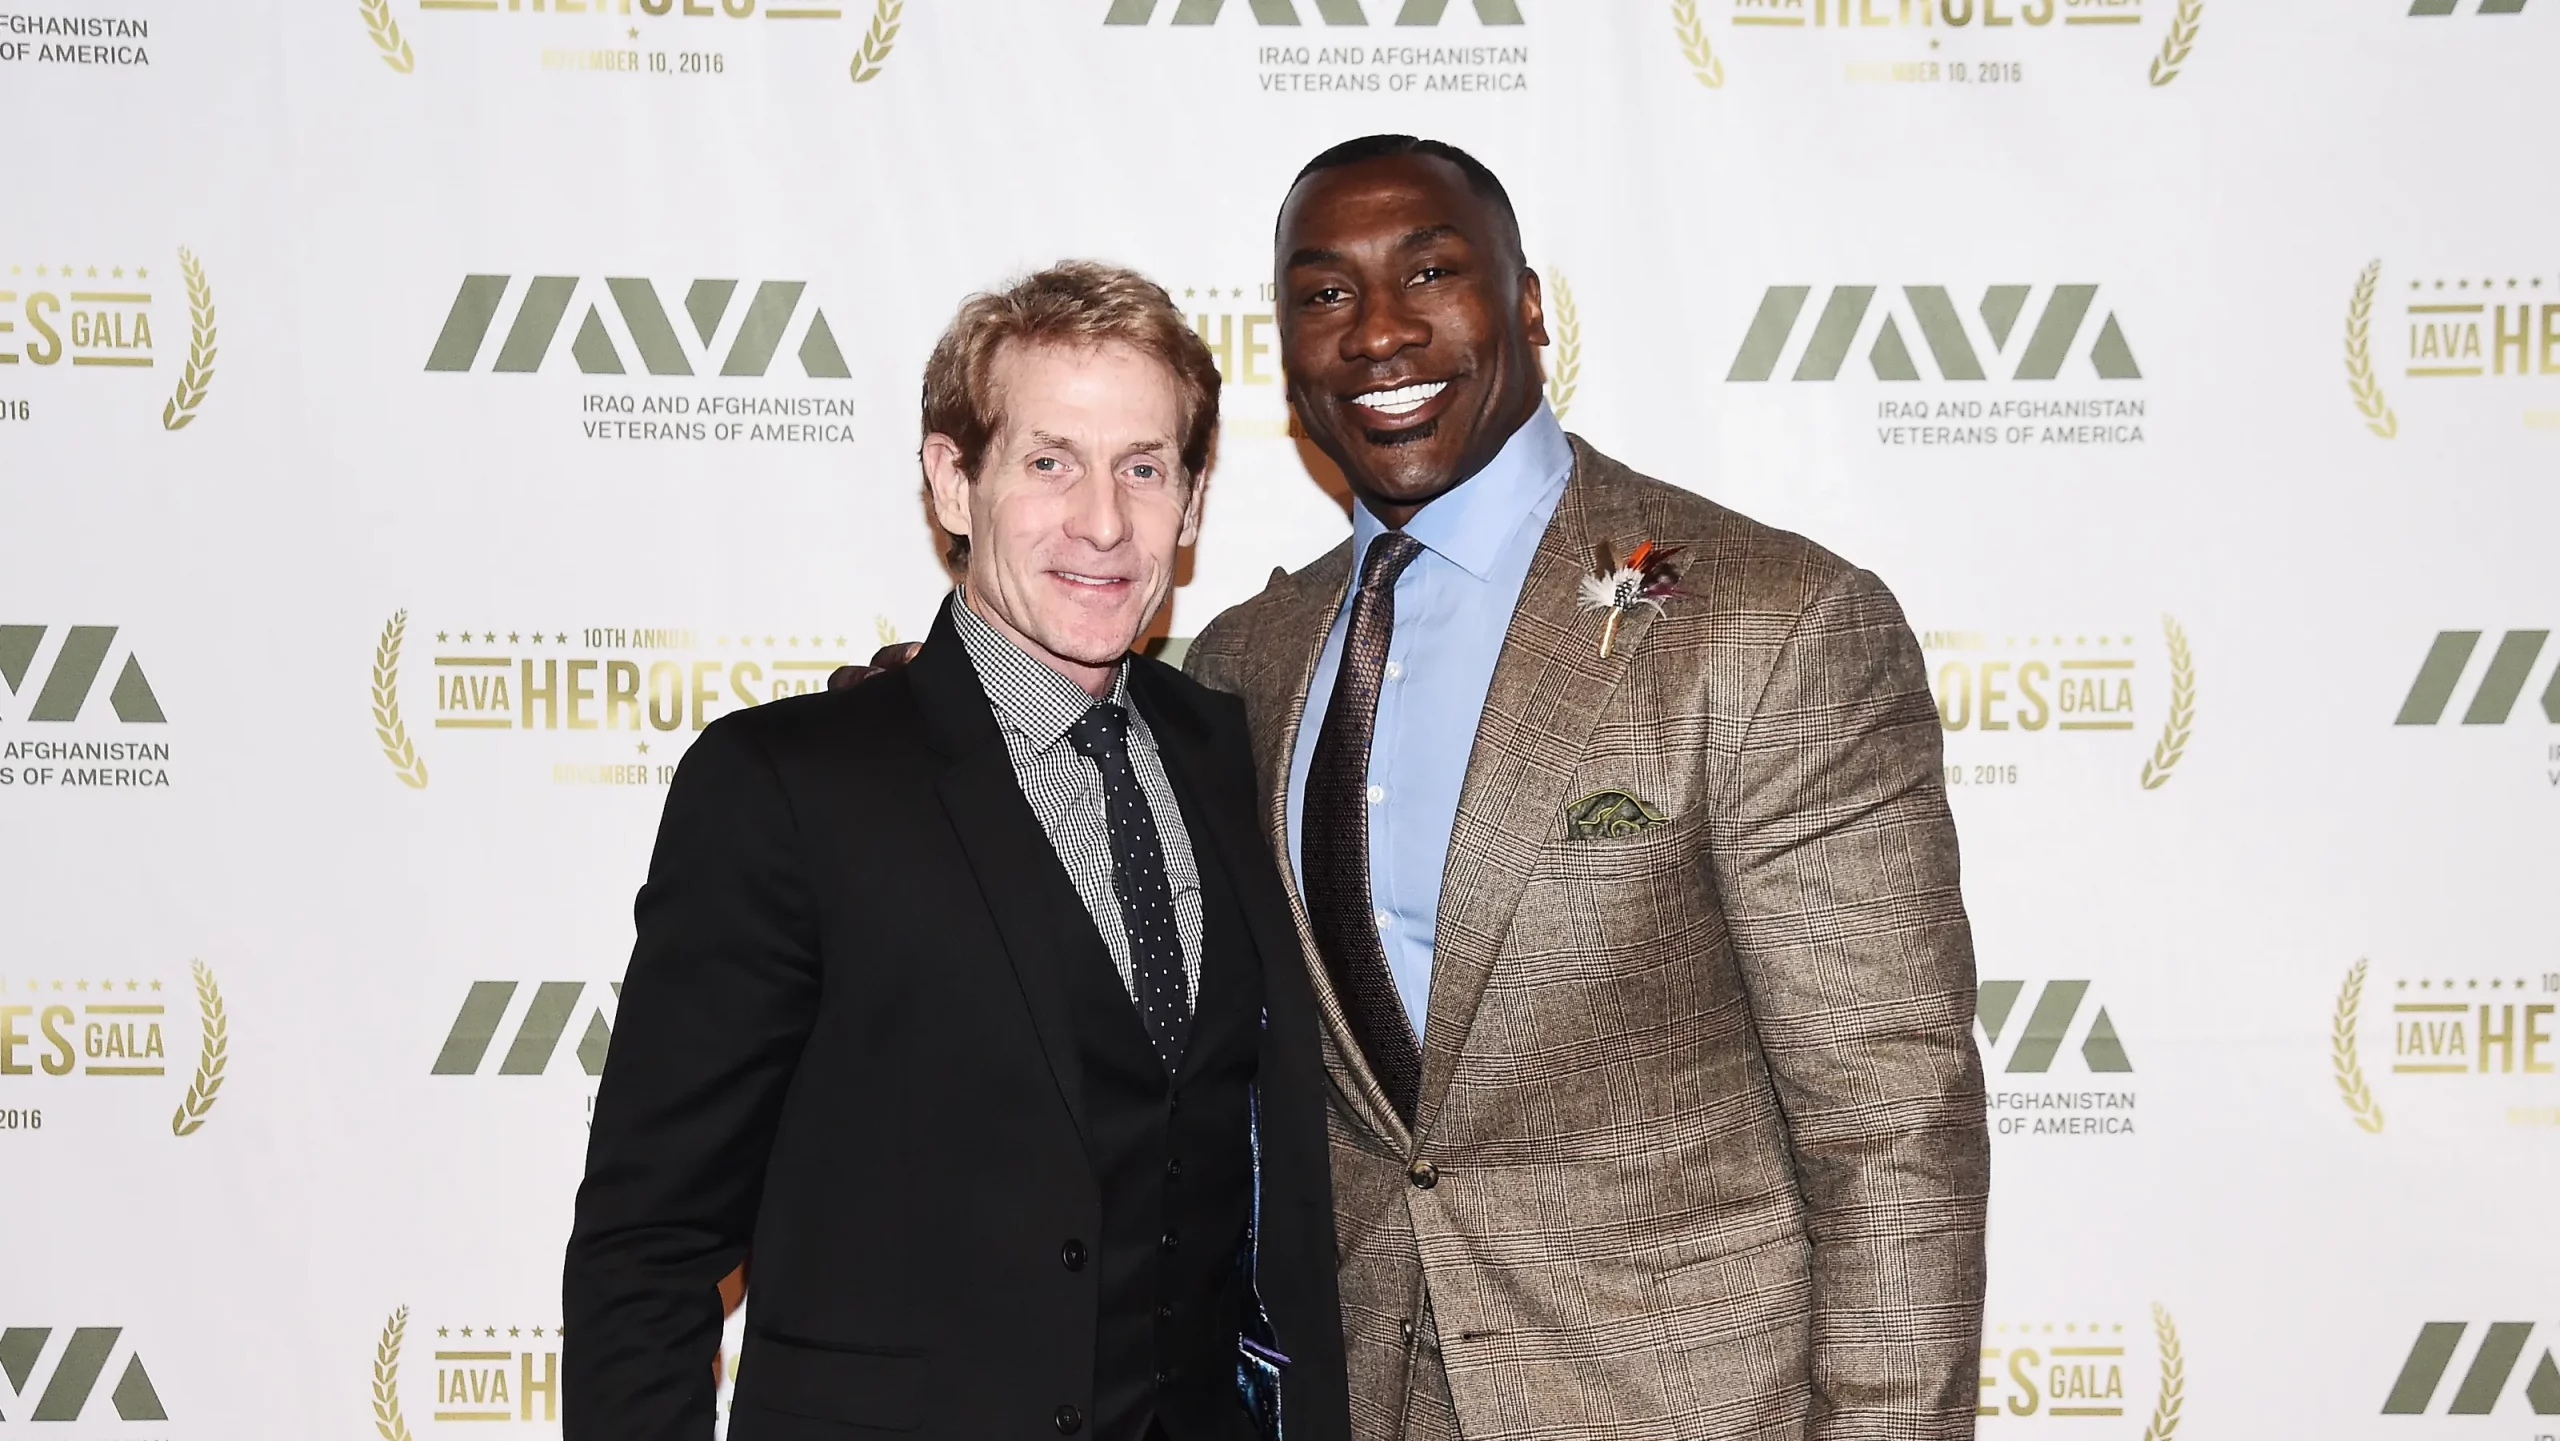 Shannon Sharpe and Skip Bayless together (Credits: USA Today)